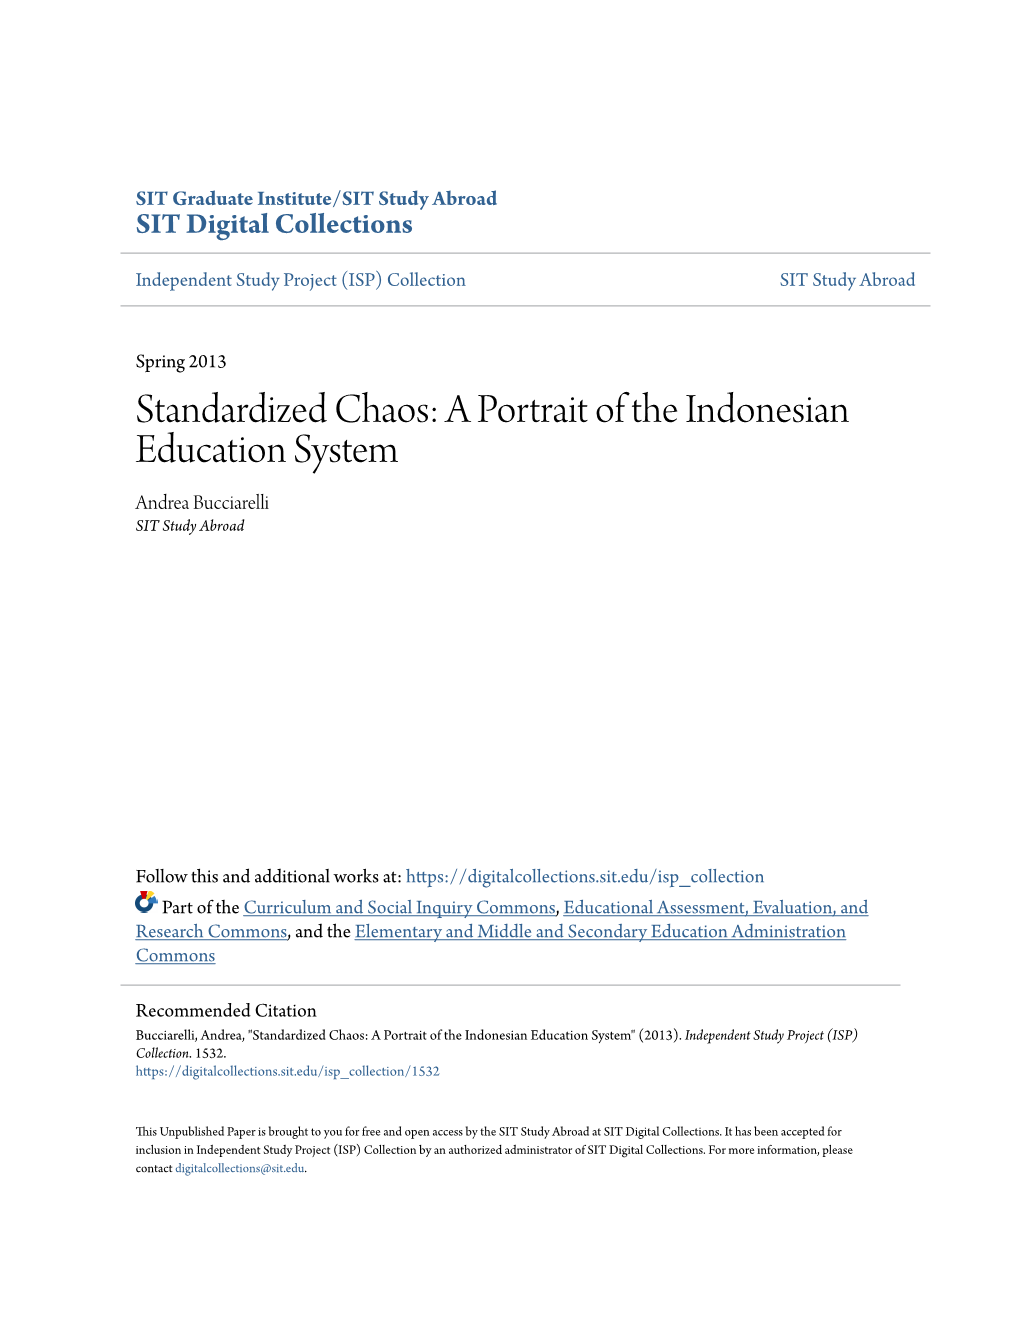 A Portrait of the Indonesian Education System Andrea Bucciarelli SIT Study Abroad